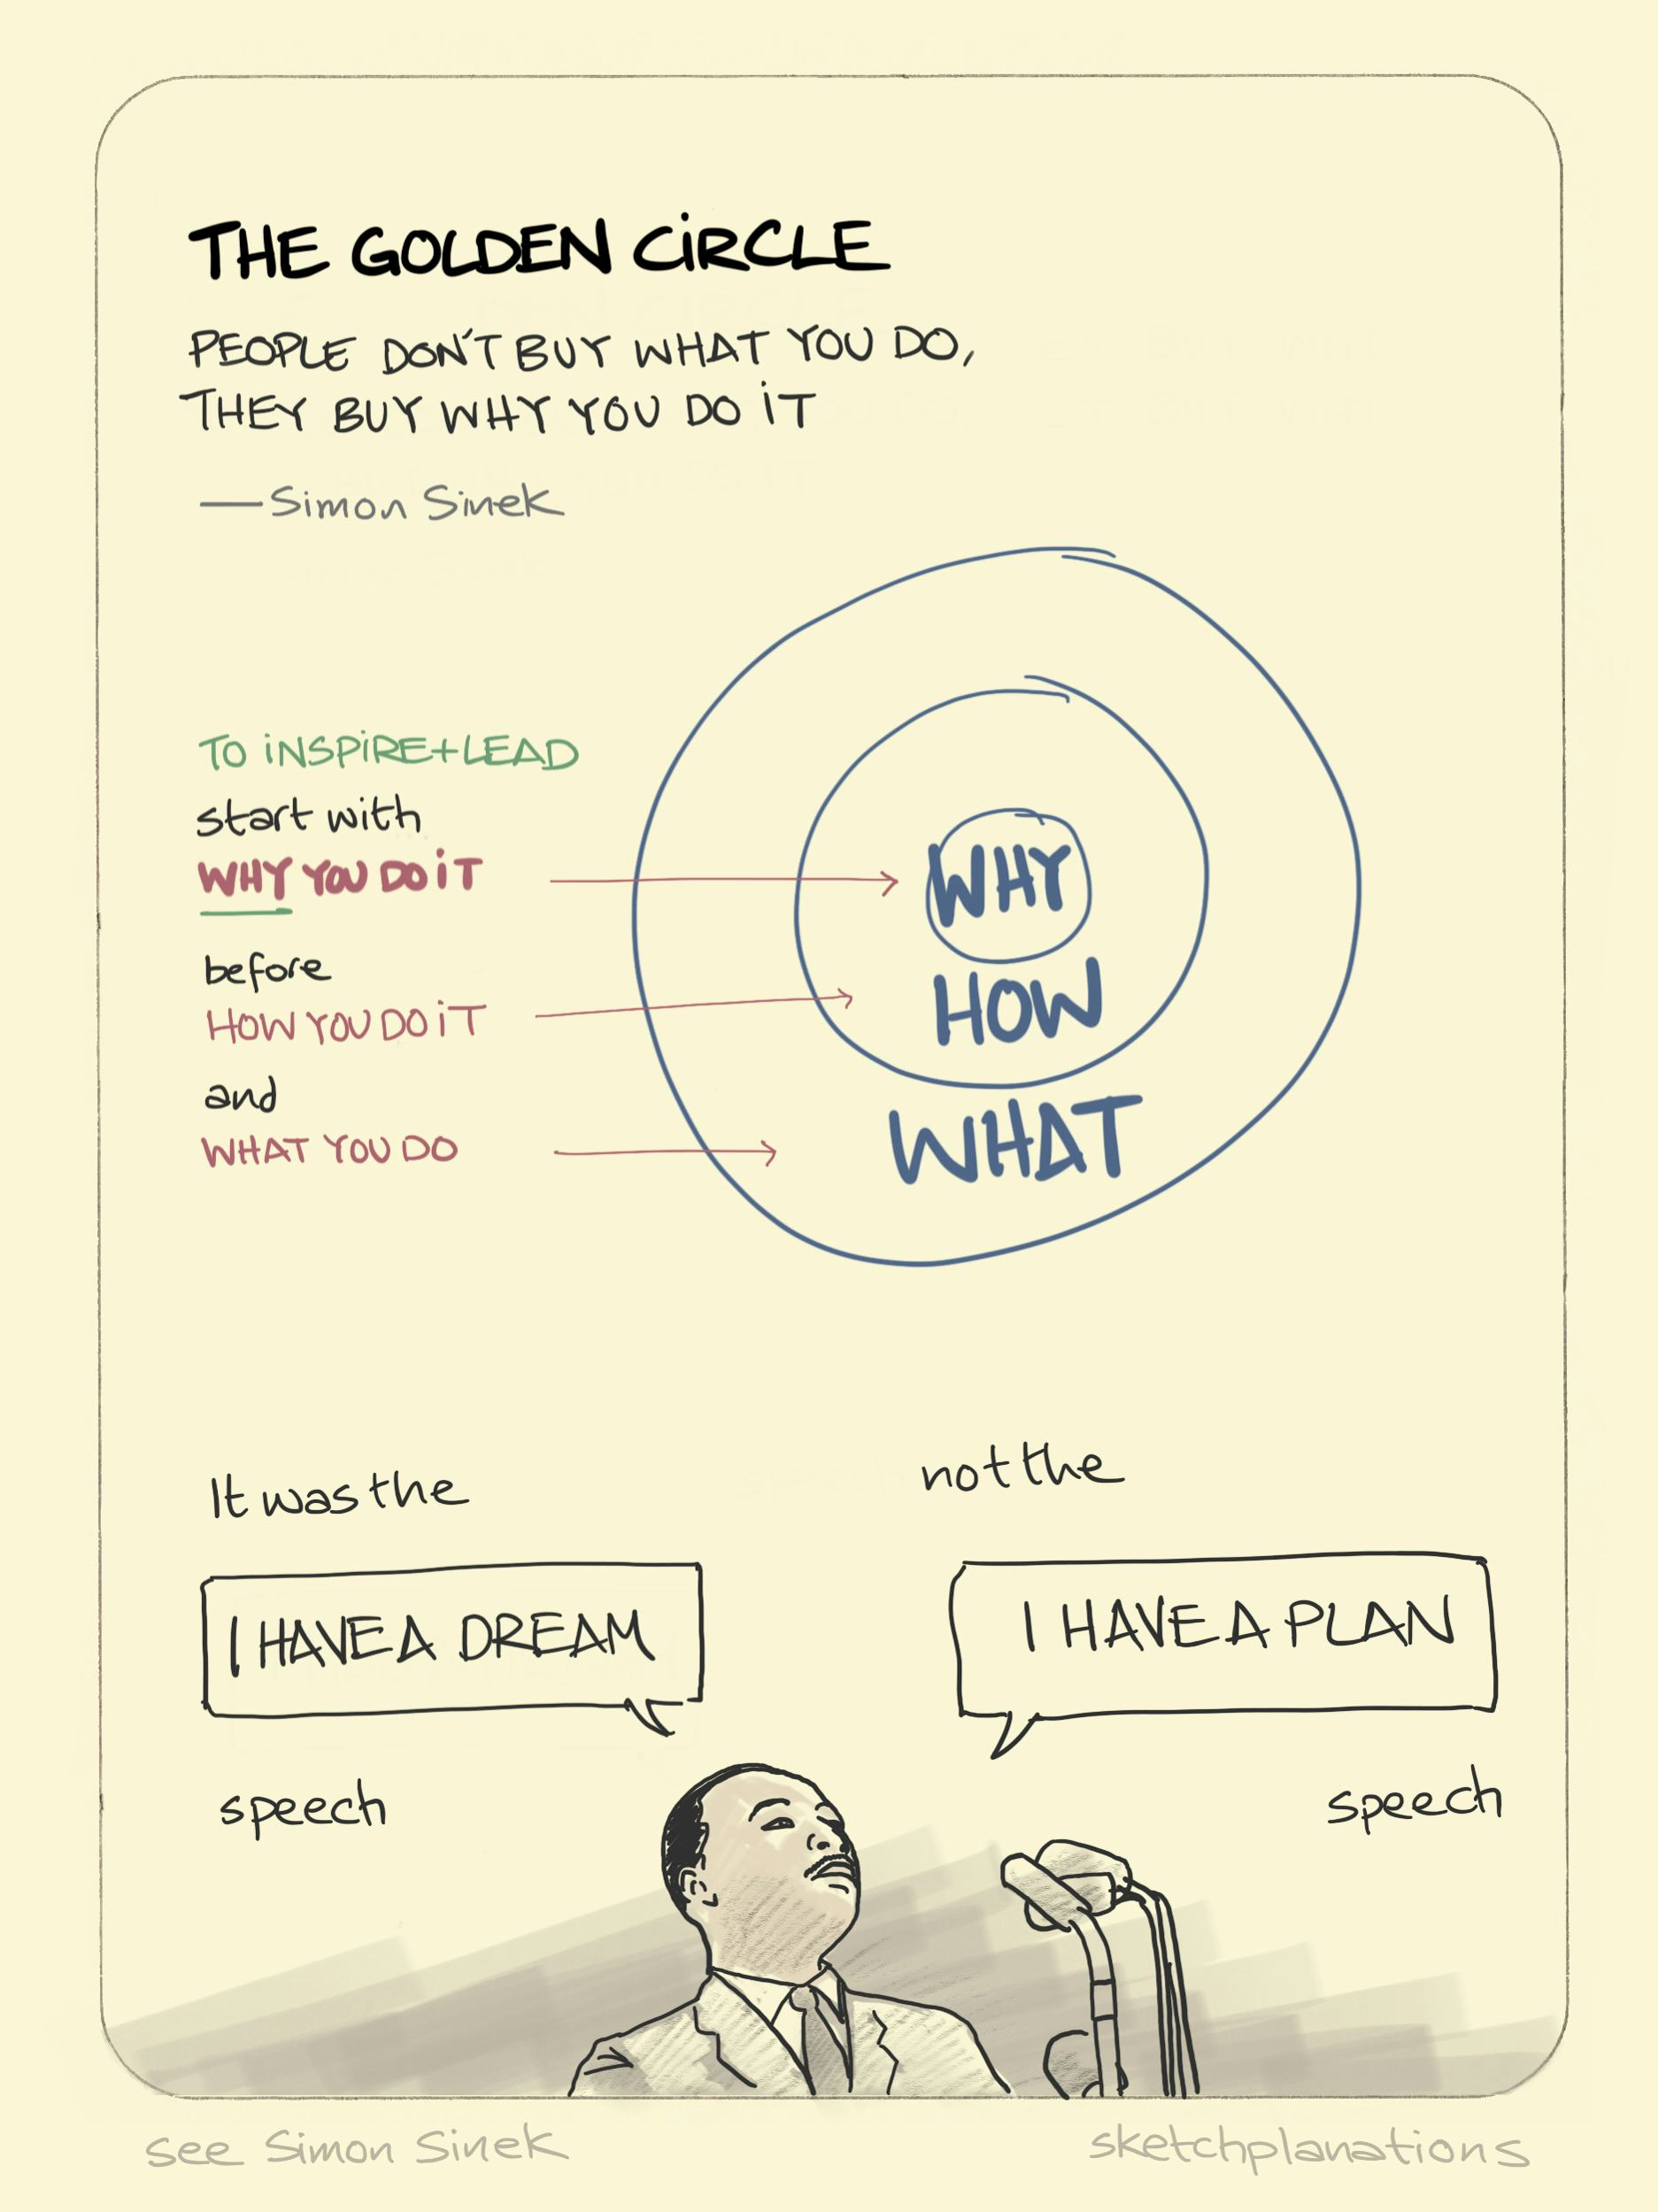 The golden circle: illustrated with the start with why circles, and Martin Luther King and the "I have a dream," not the "I have a plan," speech